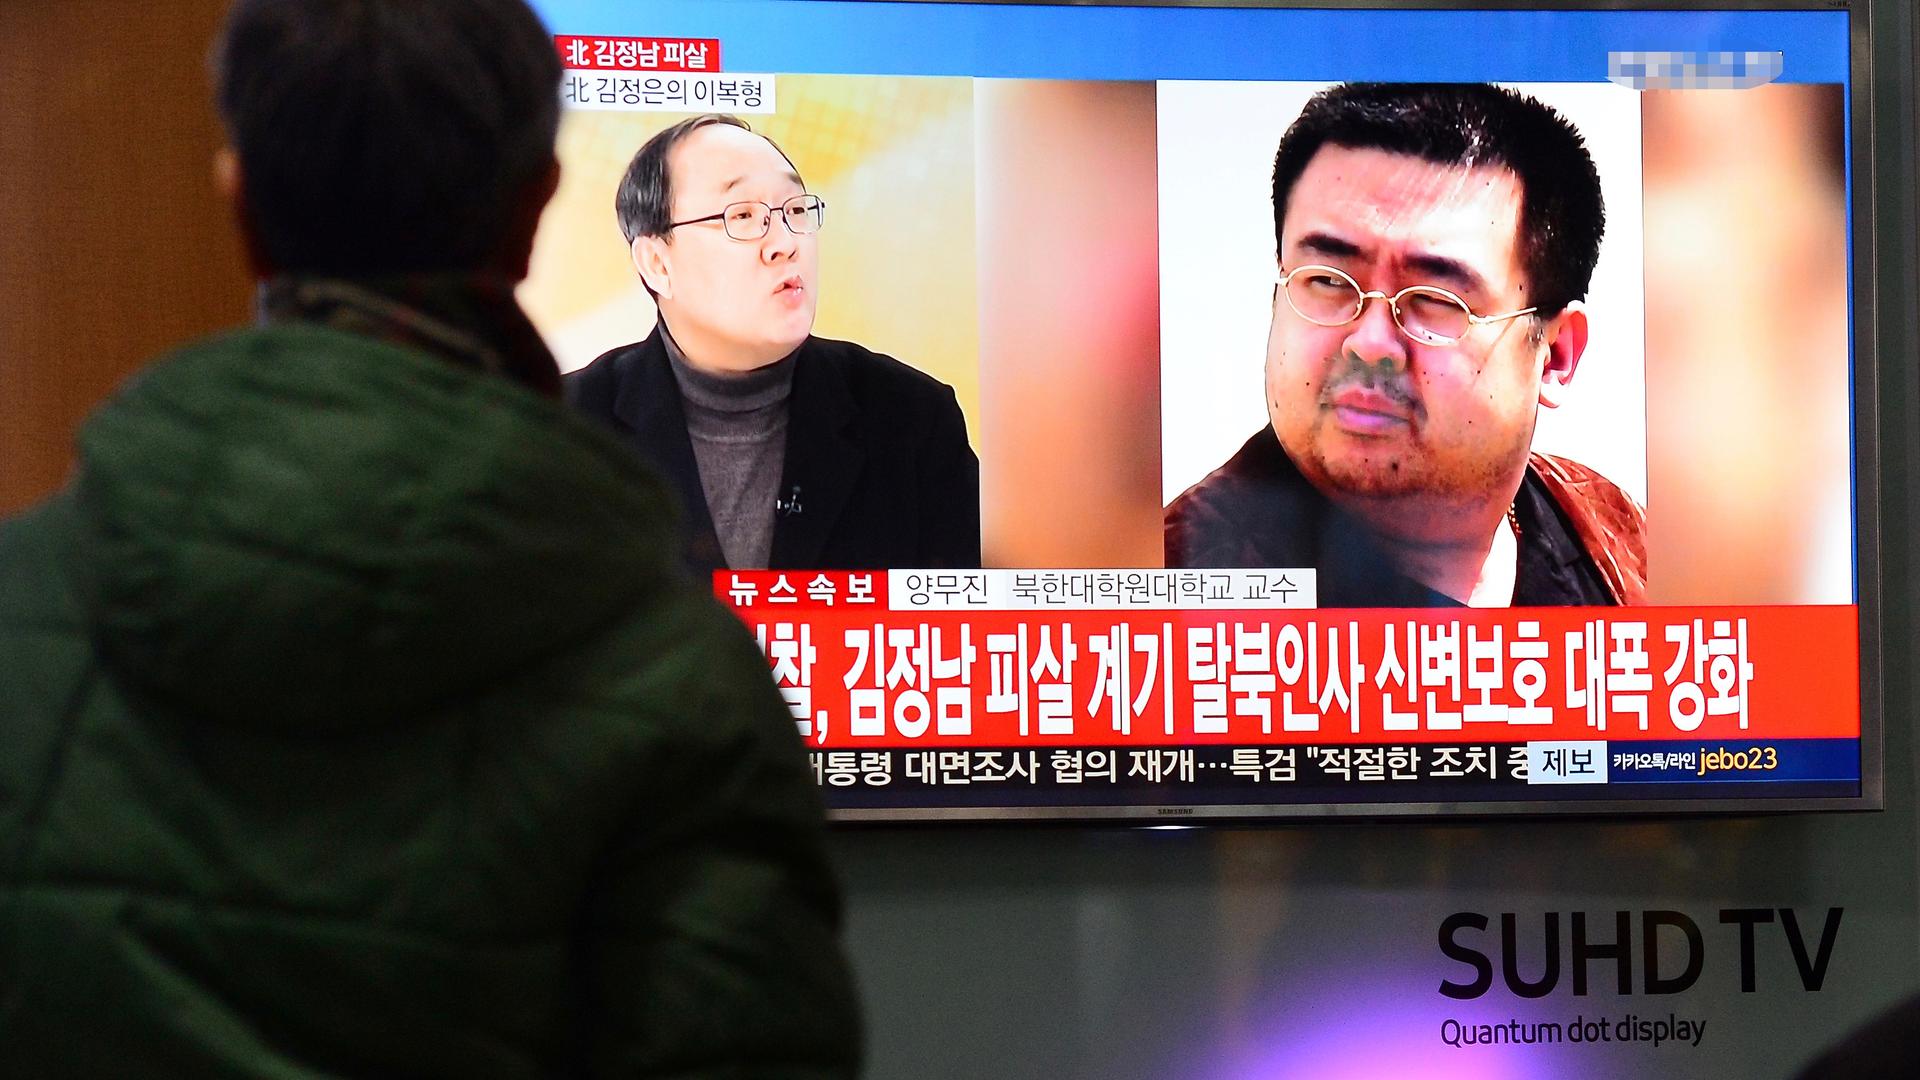 People watch a TV screen broadcasting a news report on the assassination of Kim Jong-nam, the older half-brother of the North Korean leader Kim Jong-un, at a railway station in Seoul, South Korea, on February 14, 2017.